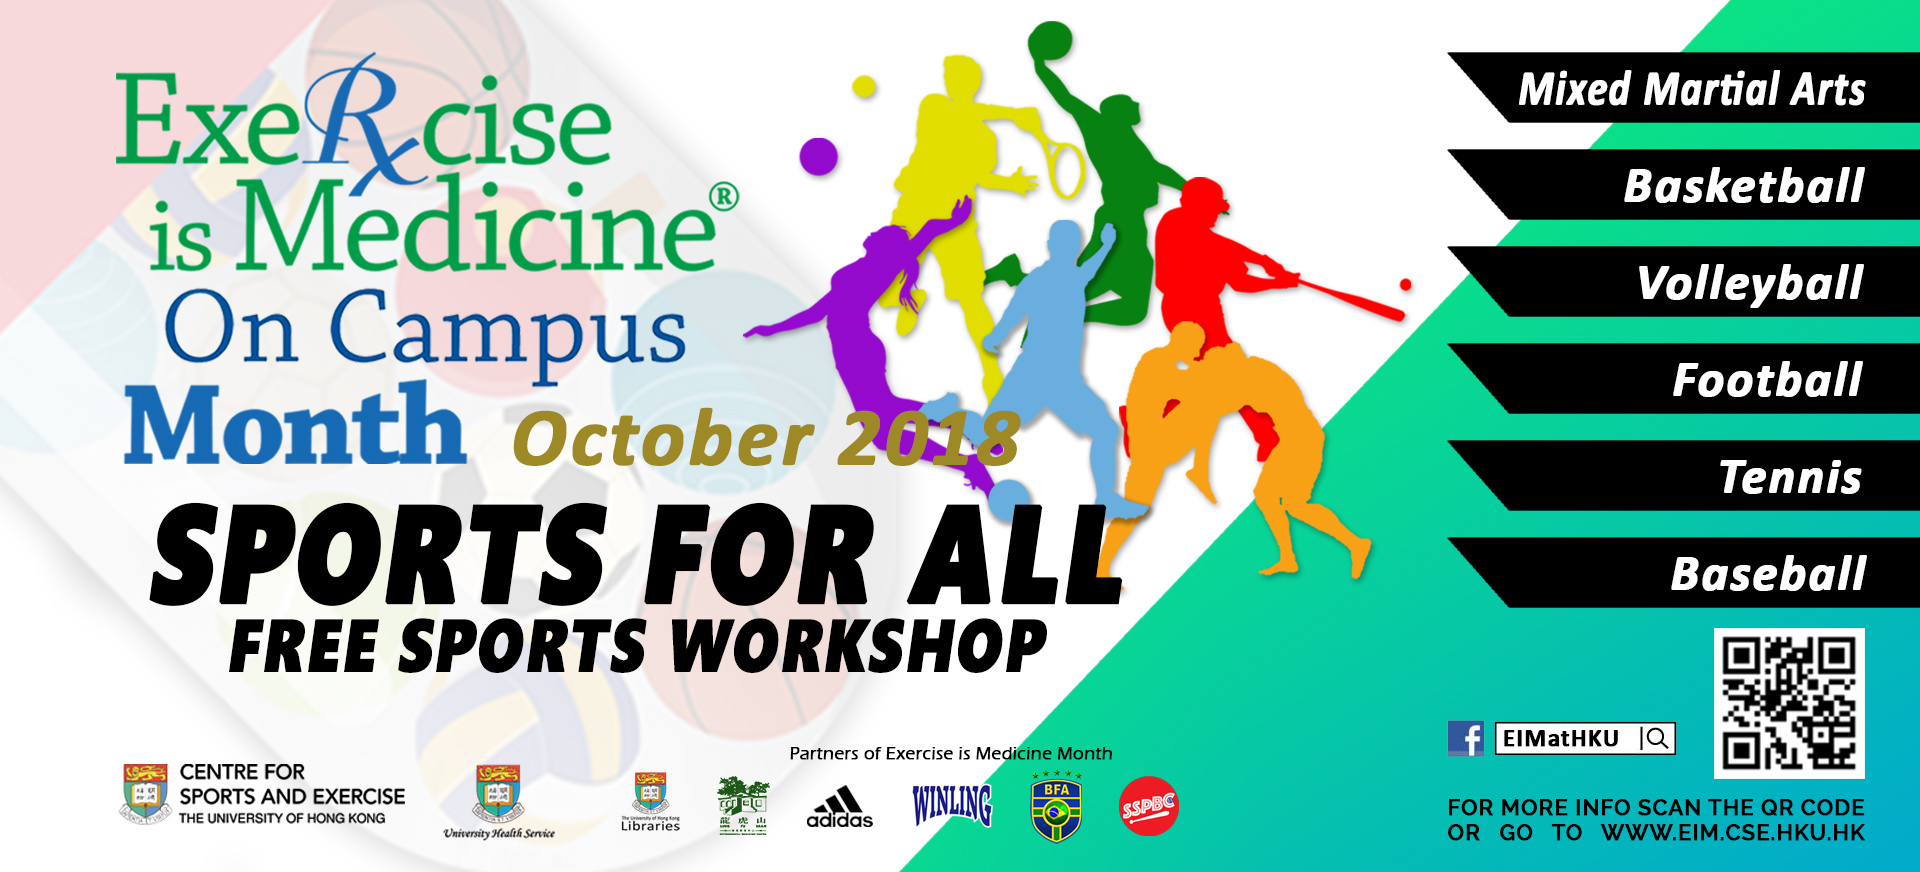 Exercise is Medicine on Campus - Sports for All Workshops